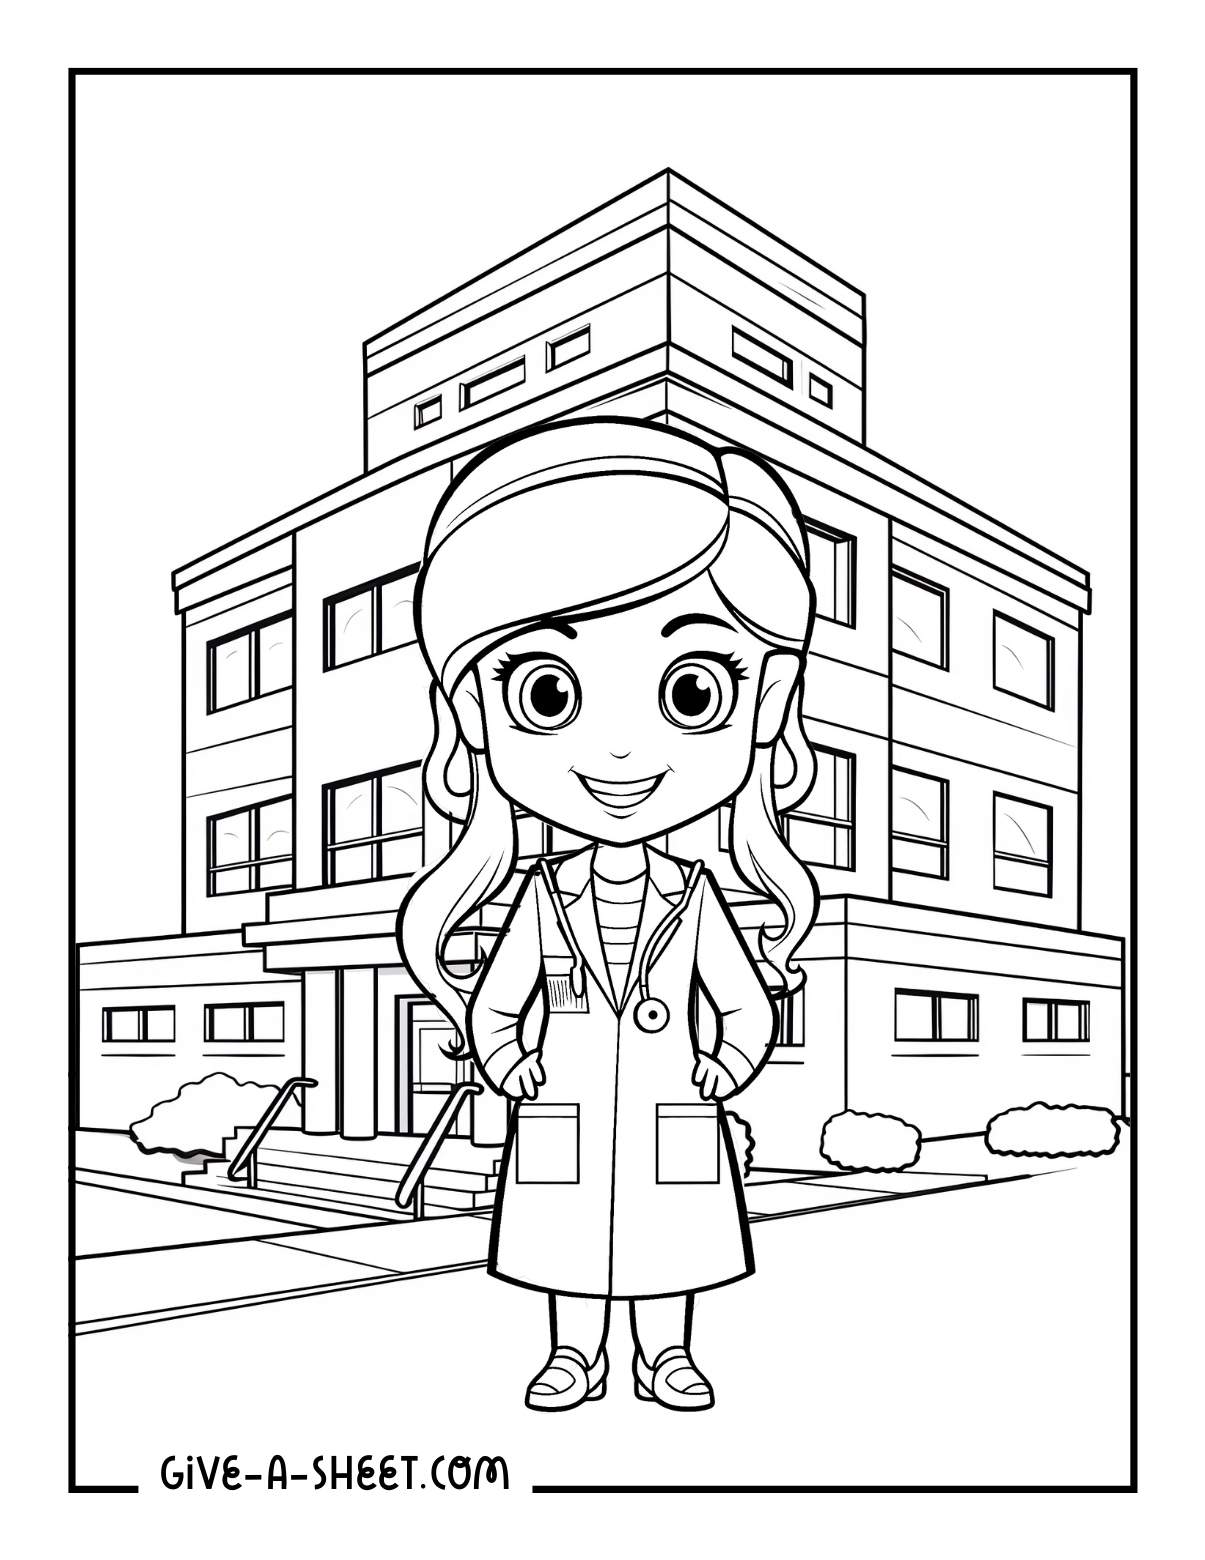 Free on duty nurse coloring page for kids.